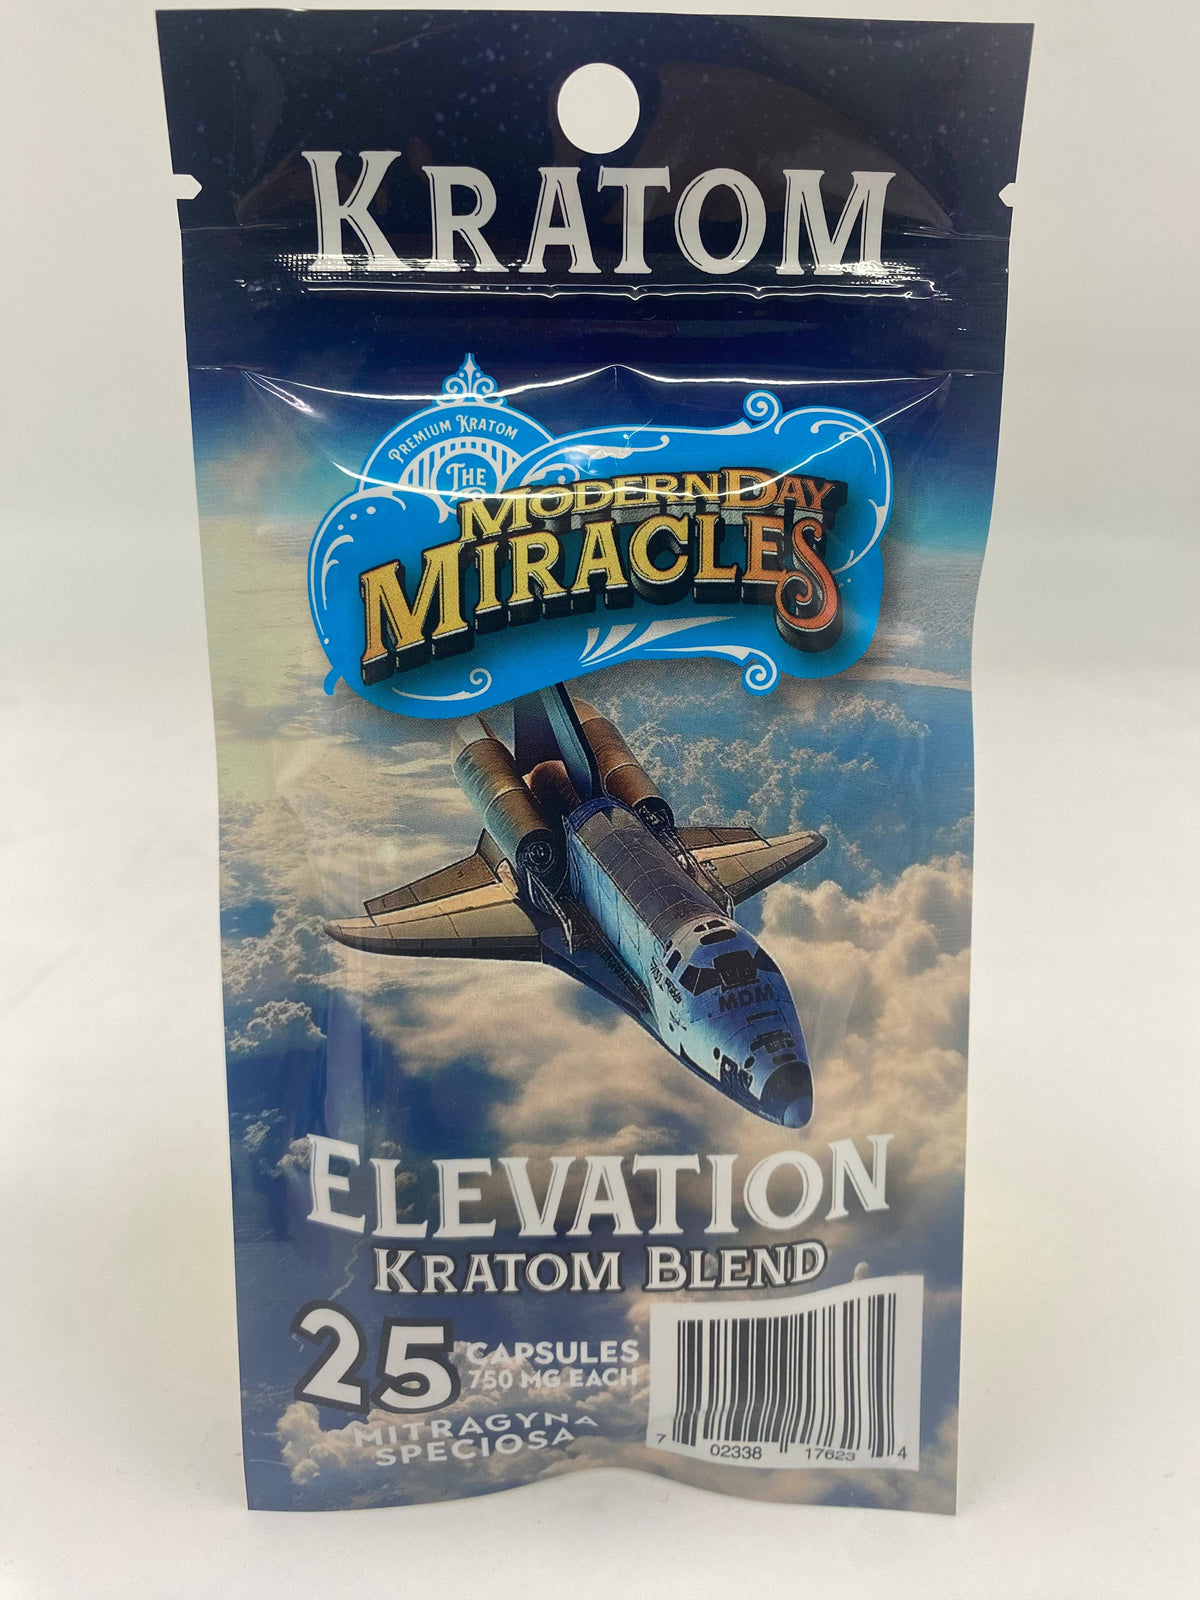 Modern Day Miracles Space Blends- Elevation White Kratom Cambodia Blend 25ct Capsules